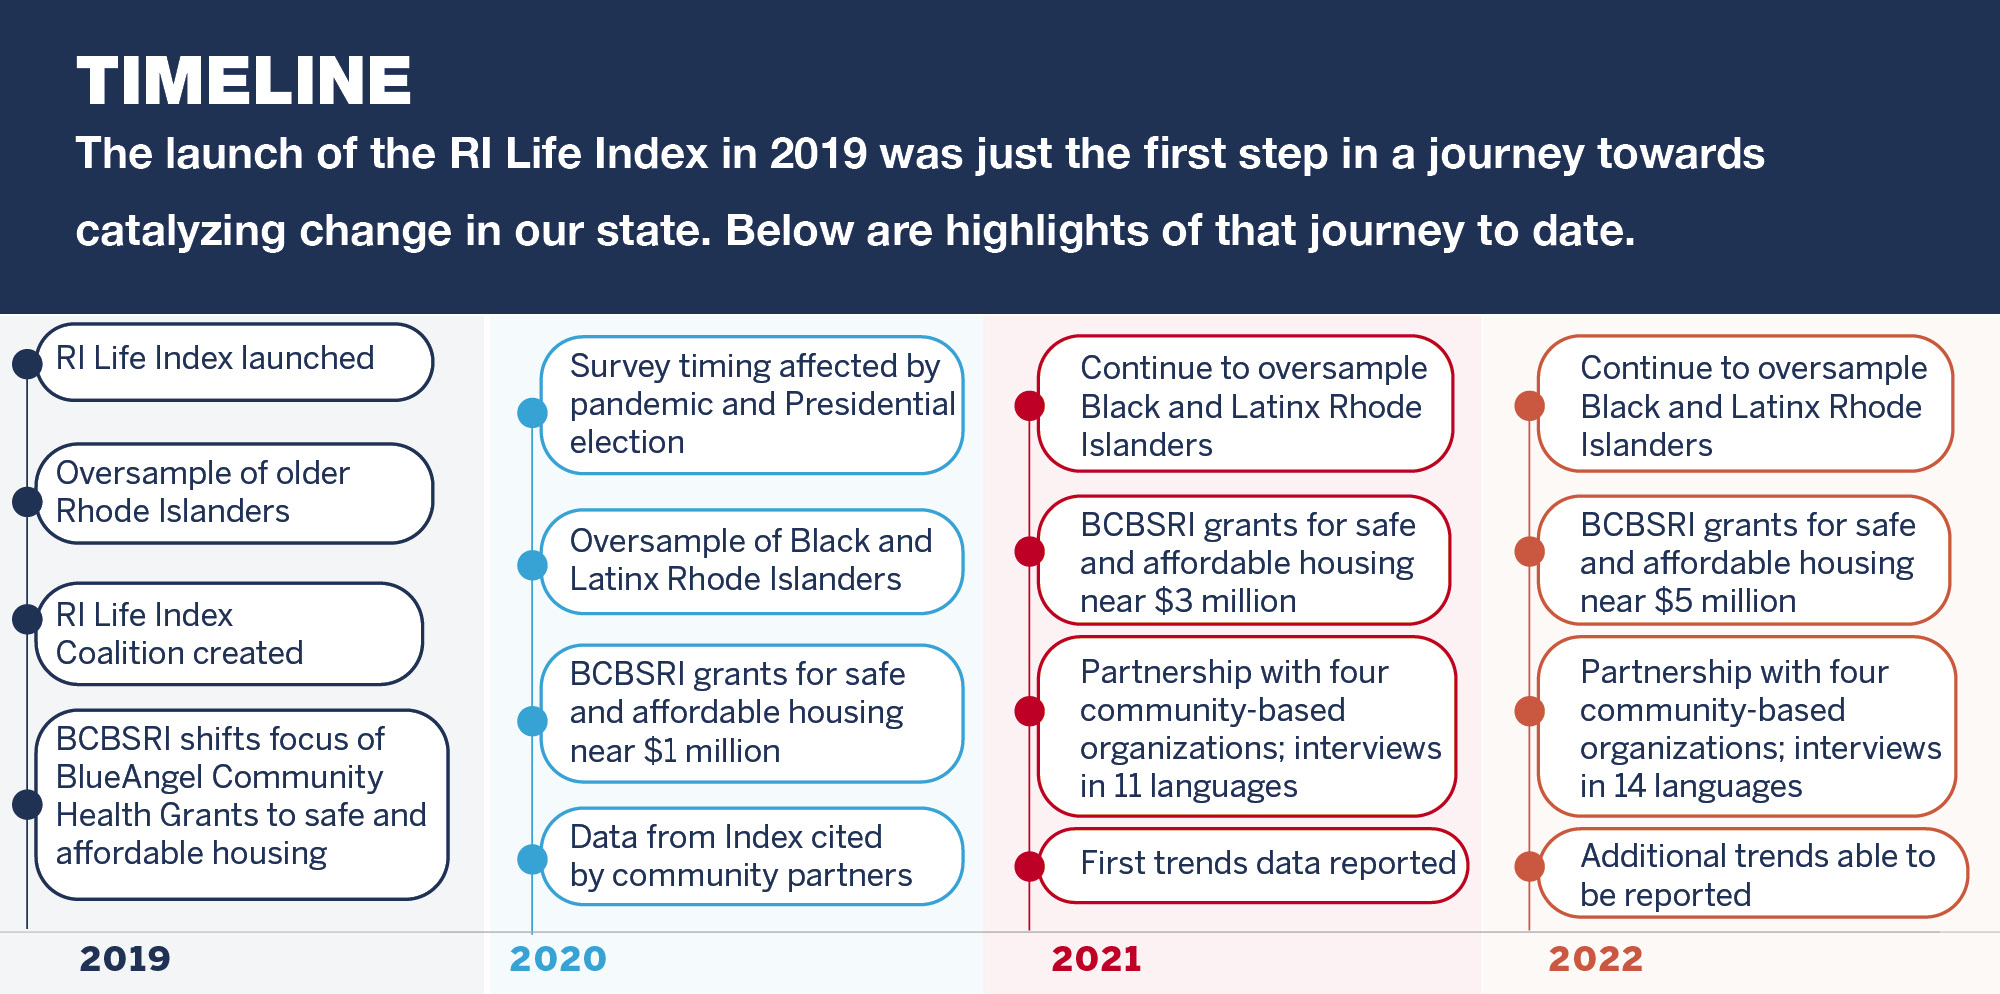 Timeline: The launch of the RI Life Index in 2019 was just the first step in a journey towards catalyzing change in our state. Below are highlights of that journey to date. 2019: RI Life Index launched, Oversample of older Rhode Islanders, RI Life Index Coalition created, BCBSRI shifts focus of BlueAngel Community Health Grants to safe and affordable housing, 2020: Survey timing affected by pandemic and Presidential election, Oversample of Black and Latinx Rhode Islanders, BCBSRI grants for safe and affordable housing near $1 million, Data from Index cited by community partners, 2021: Continue to oversample Black and Latinx Rhode Islanders, BCBSRI grants for safe and affordable housing near $3 million, Partnership with four community-based organizations, interviews in 11 languages, First trends data reported, 2022: Continue to oversample Black and Latinx Rhode Islanders, BBSRI Gants for safe and affordable housing near $5 million, Partnership with four community-based organizations, interviews in 14 languages, Additional trends able to be reported